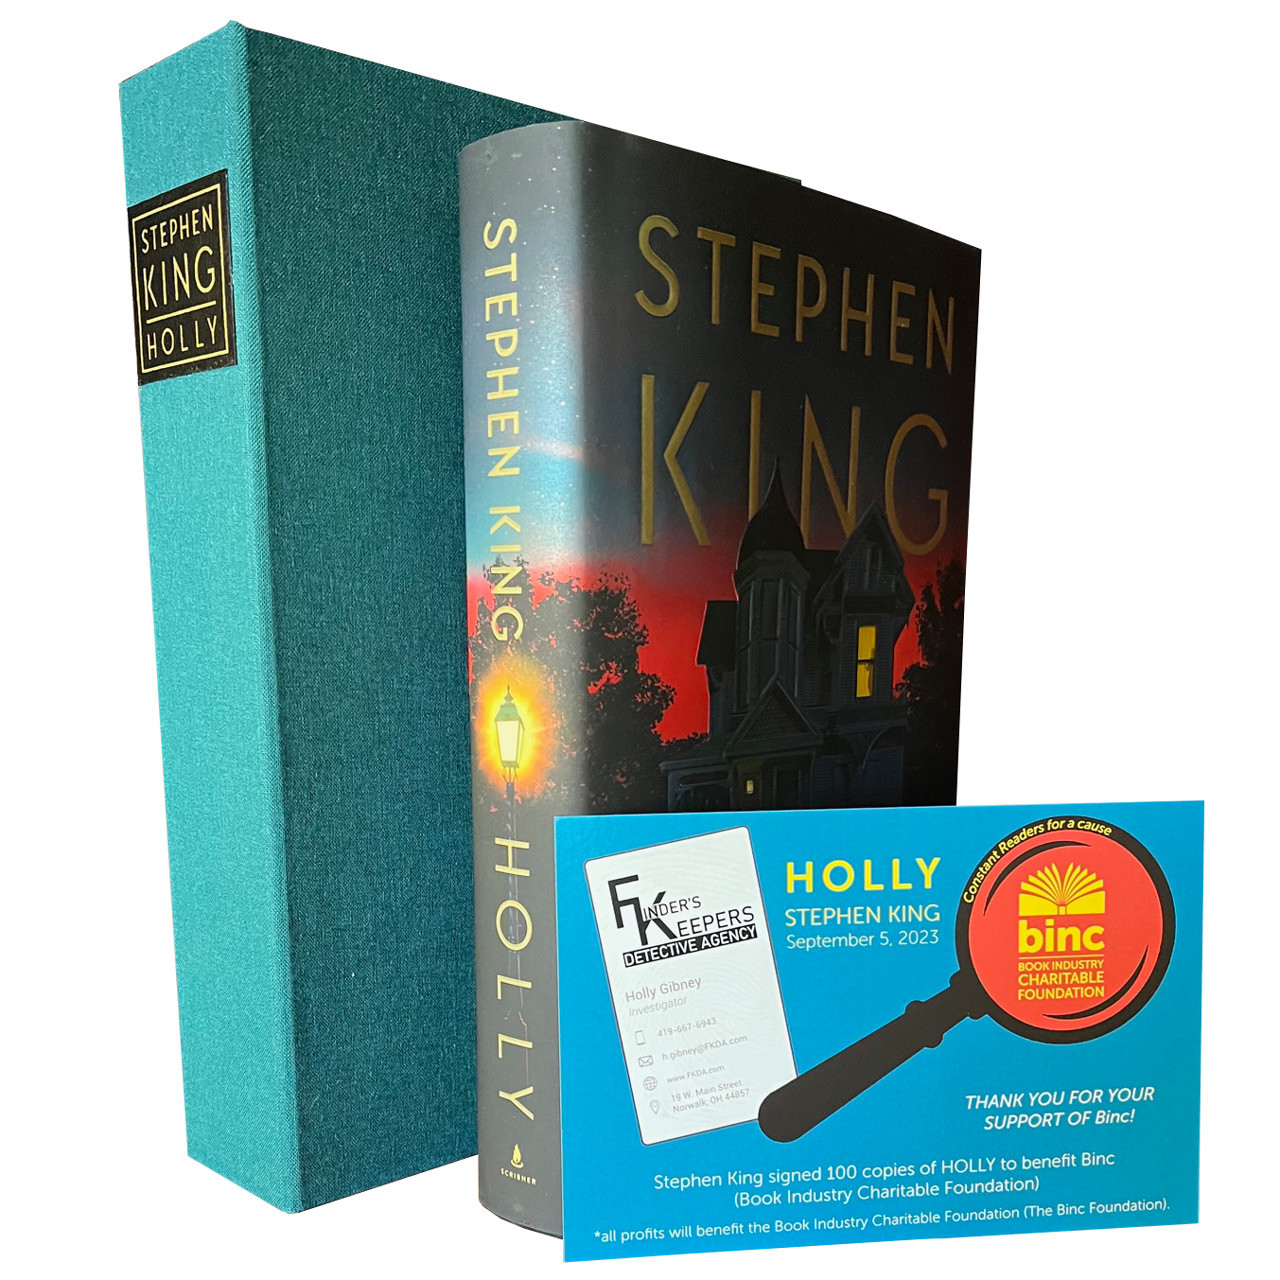 Stephen King "Holly" Traycased Signed First Edition, First Printing, Limited No. 97 /100 [Very Fine]